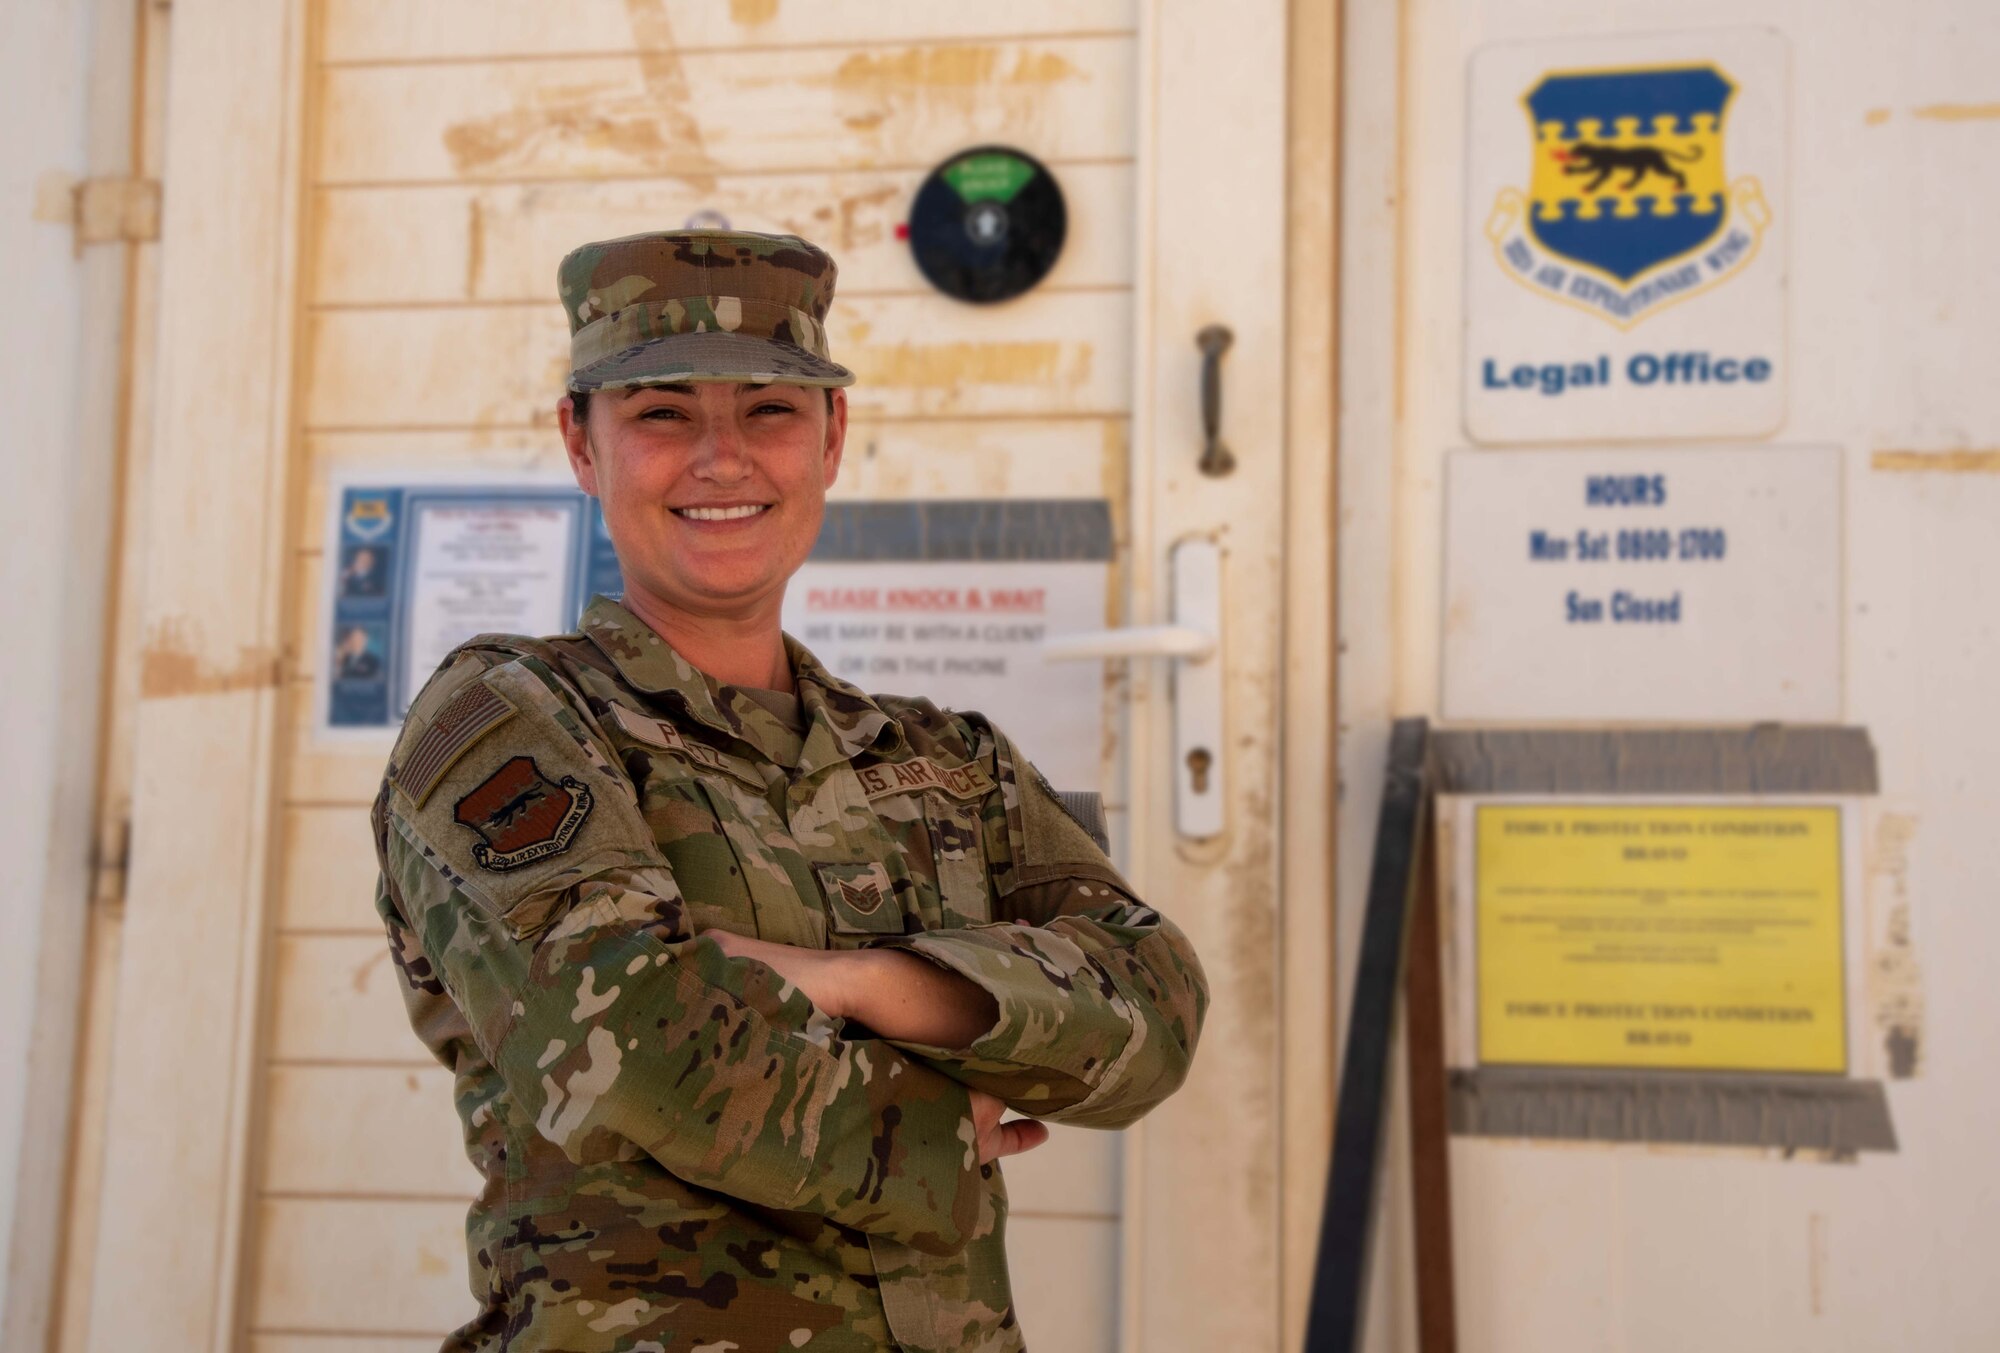 Staff Sgt. Kelly Pletz receives the "Warrior of the Week" award at the Judge Advocate General Office, 332d Aerial Expeditionary Wing at an undisclosed location in Southwest Asia, August 26, 2022. Pletz earned recognition for her many contributions to the mission in addition to her work as the Non-Commissioned Officer In Charge of the Legal Office. (U.S. Air Force photo by: Tech. Sgt. Jim Bentley)